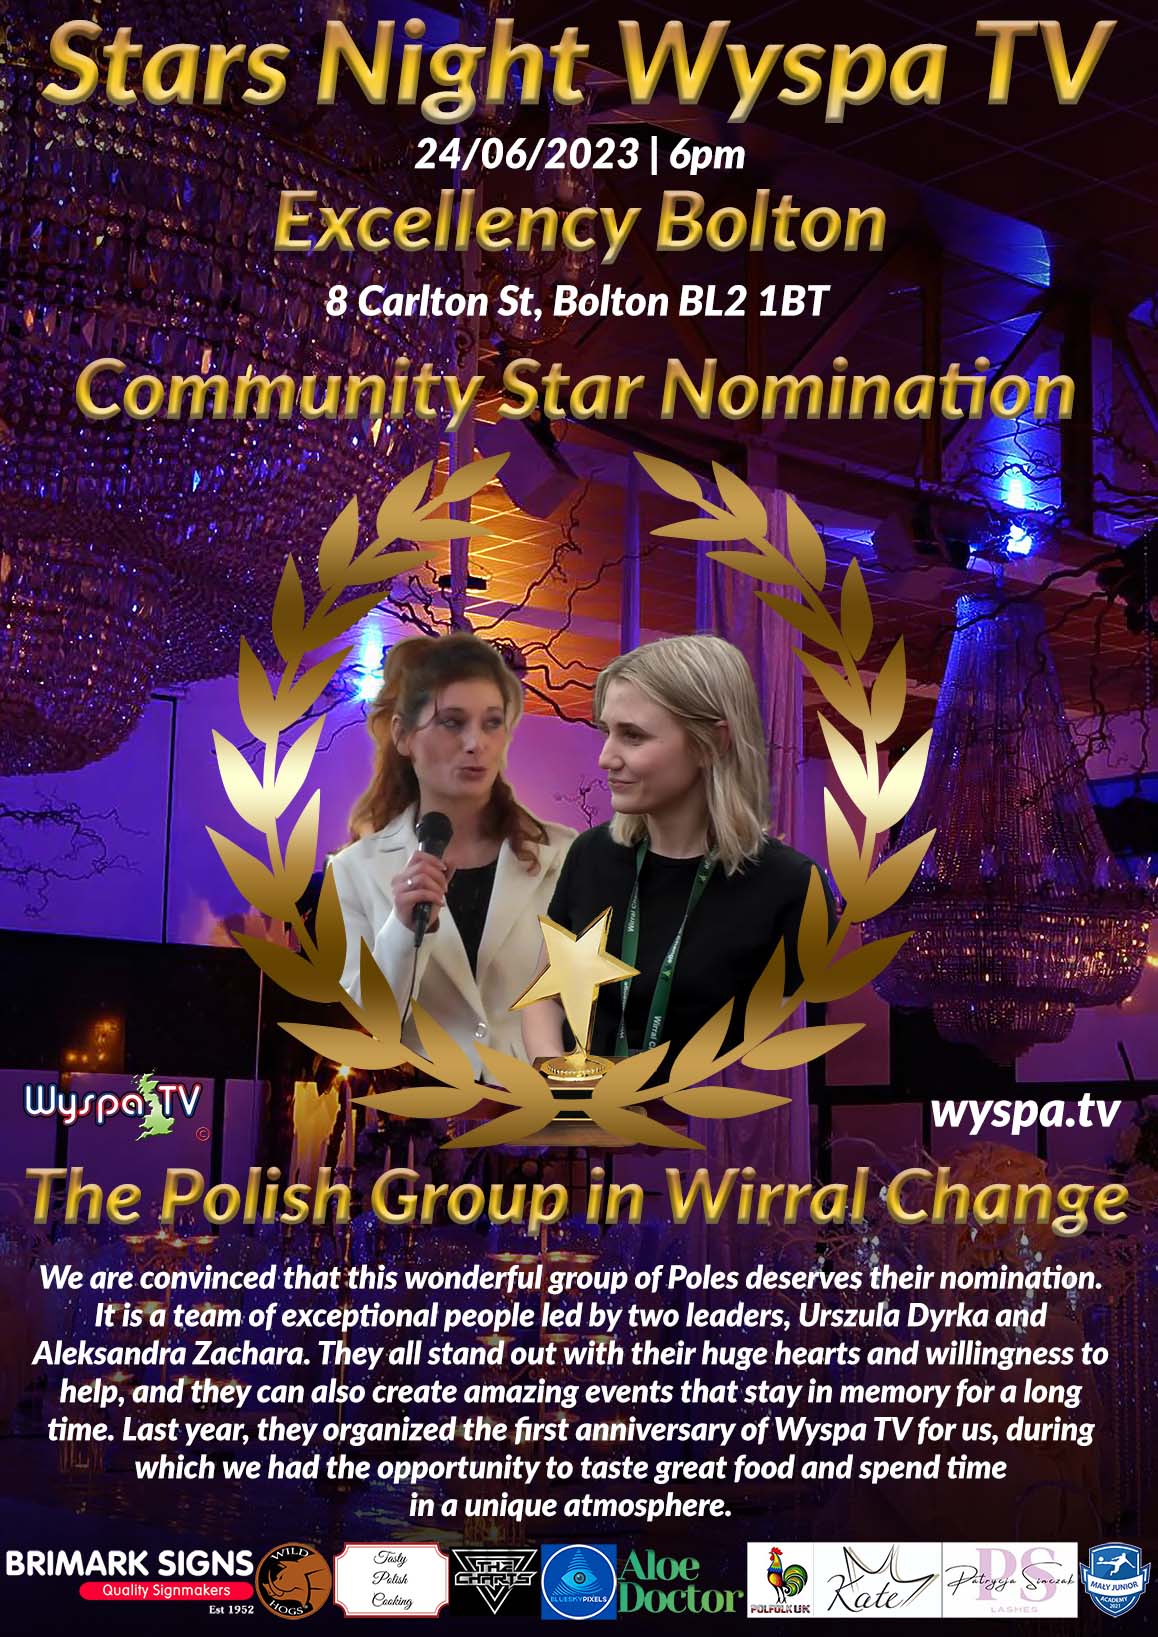  The Polish Group in Wirral Change